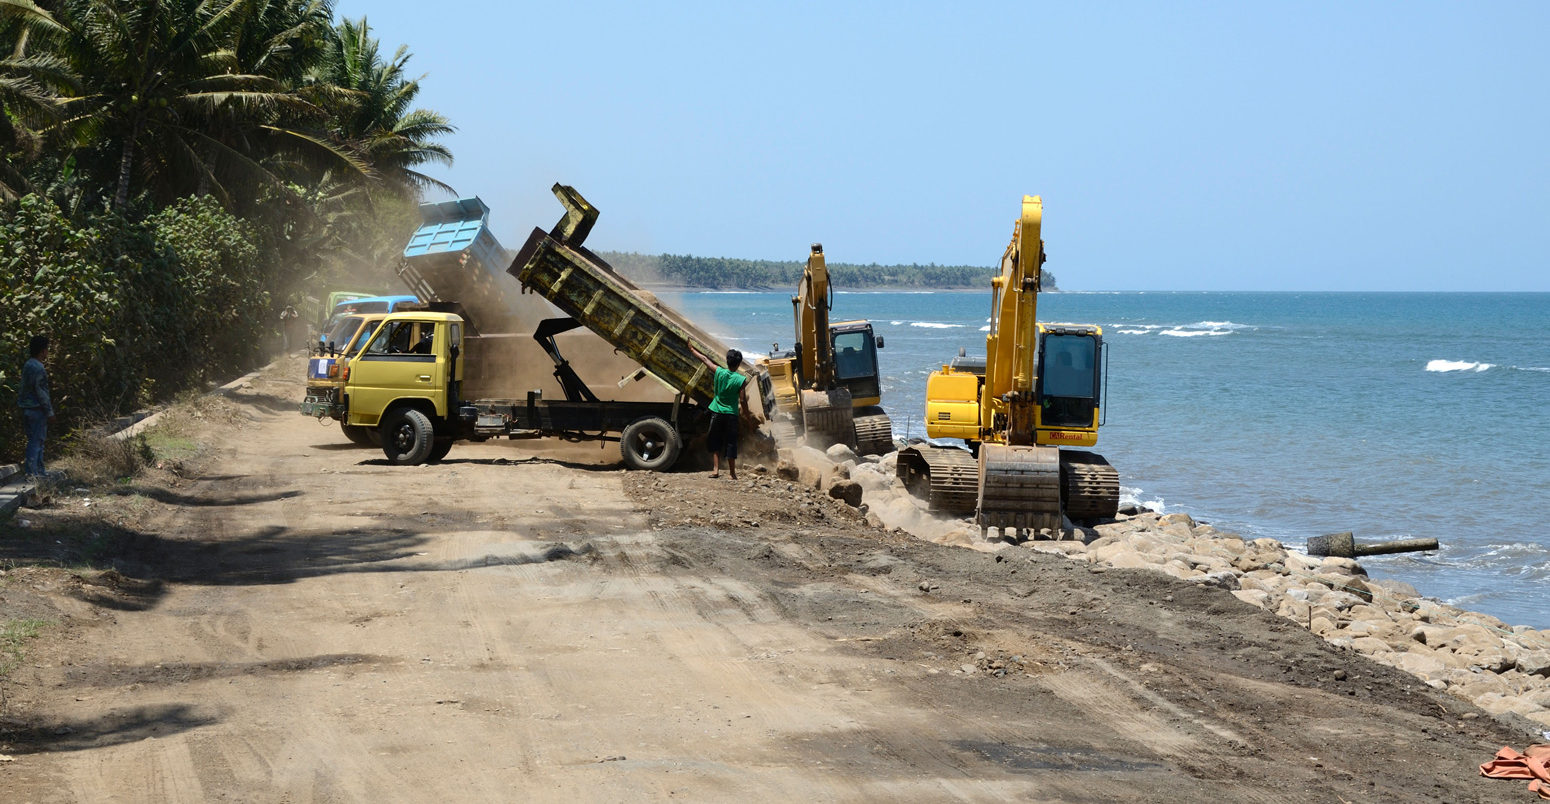 Trucks tipping boulders on to beach to build a new breakwater to prevent further coastal erosion. Lombok, Indonesia.